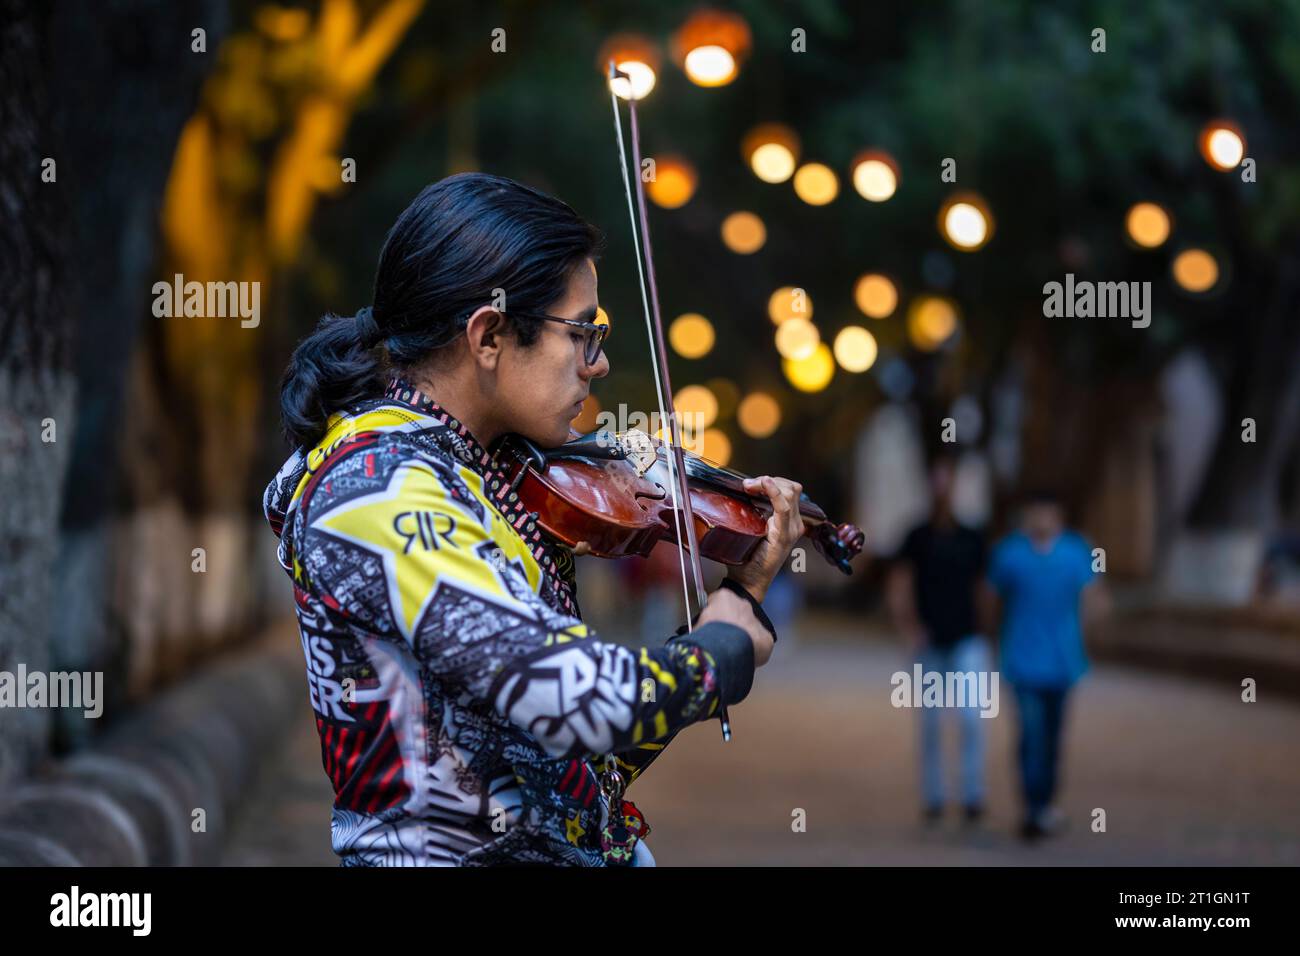 Young violinist makes a little extra income while practicing on the San Diego pedestrian mall in Morelia, Michoacan, Mexico. Stock Photo